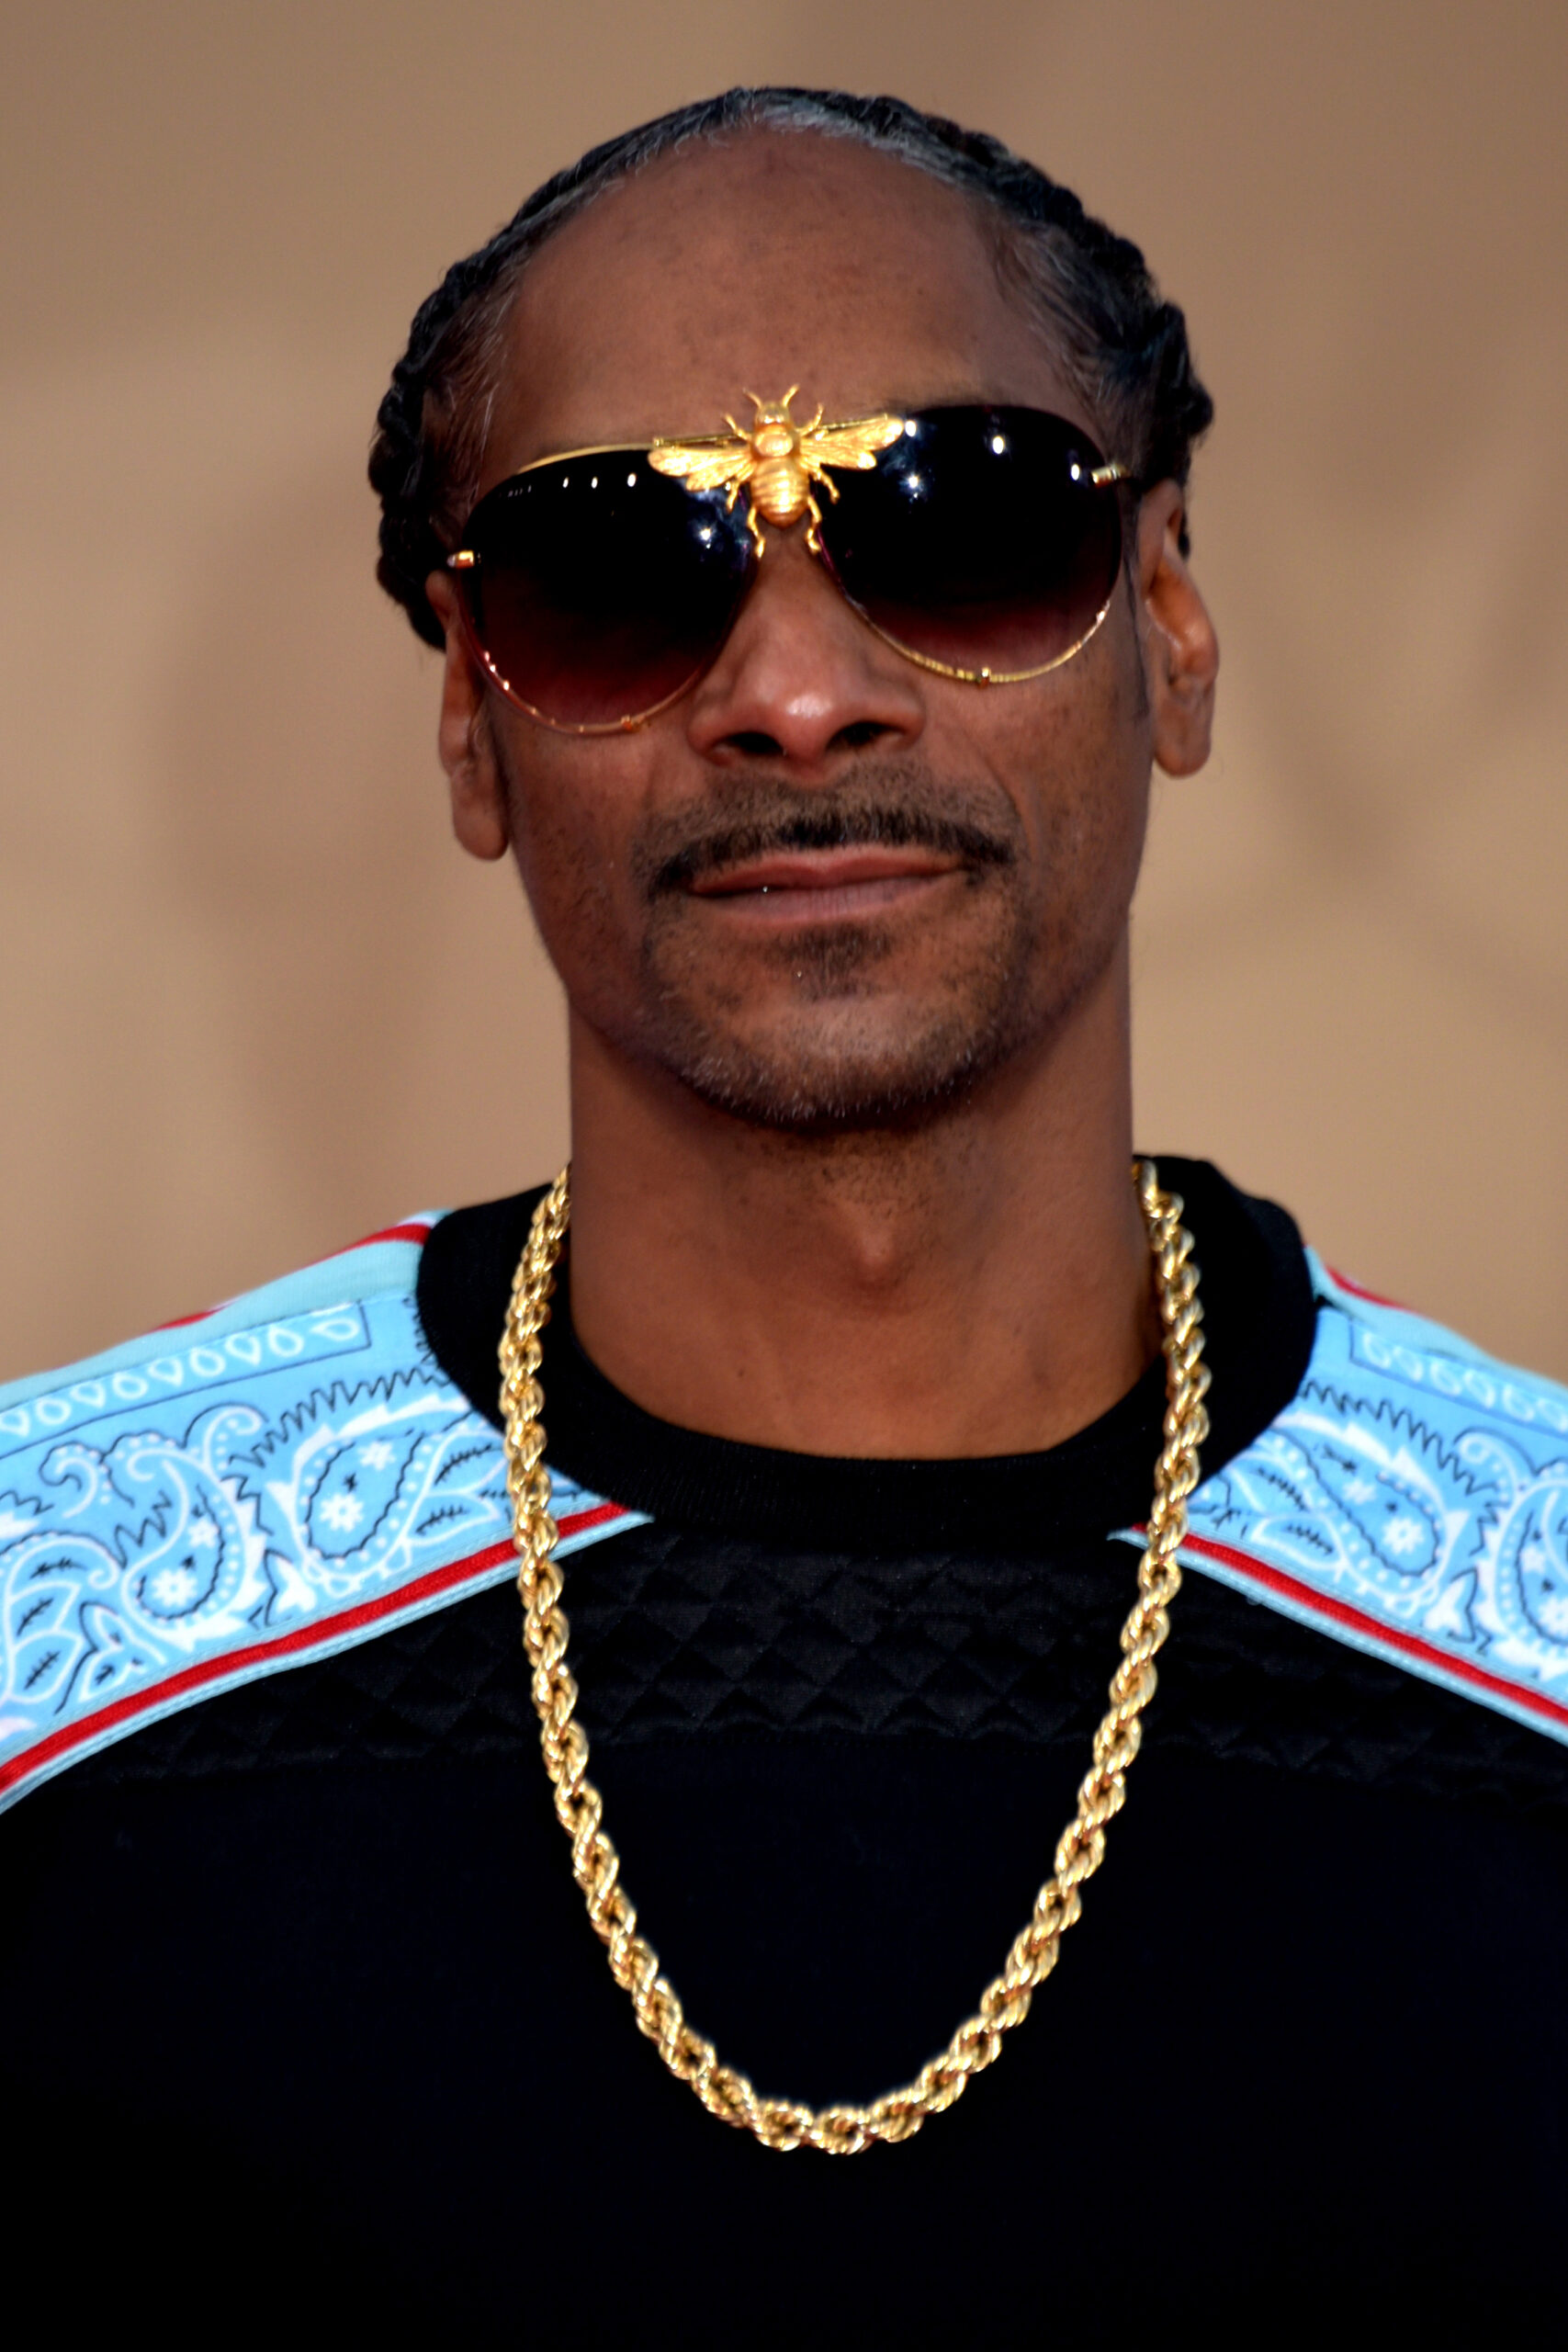 Snoop Dogg, the iconic hip-hop company Def Jam, has hired him as an executive